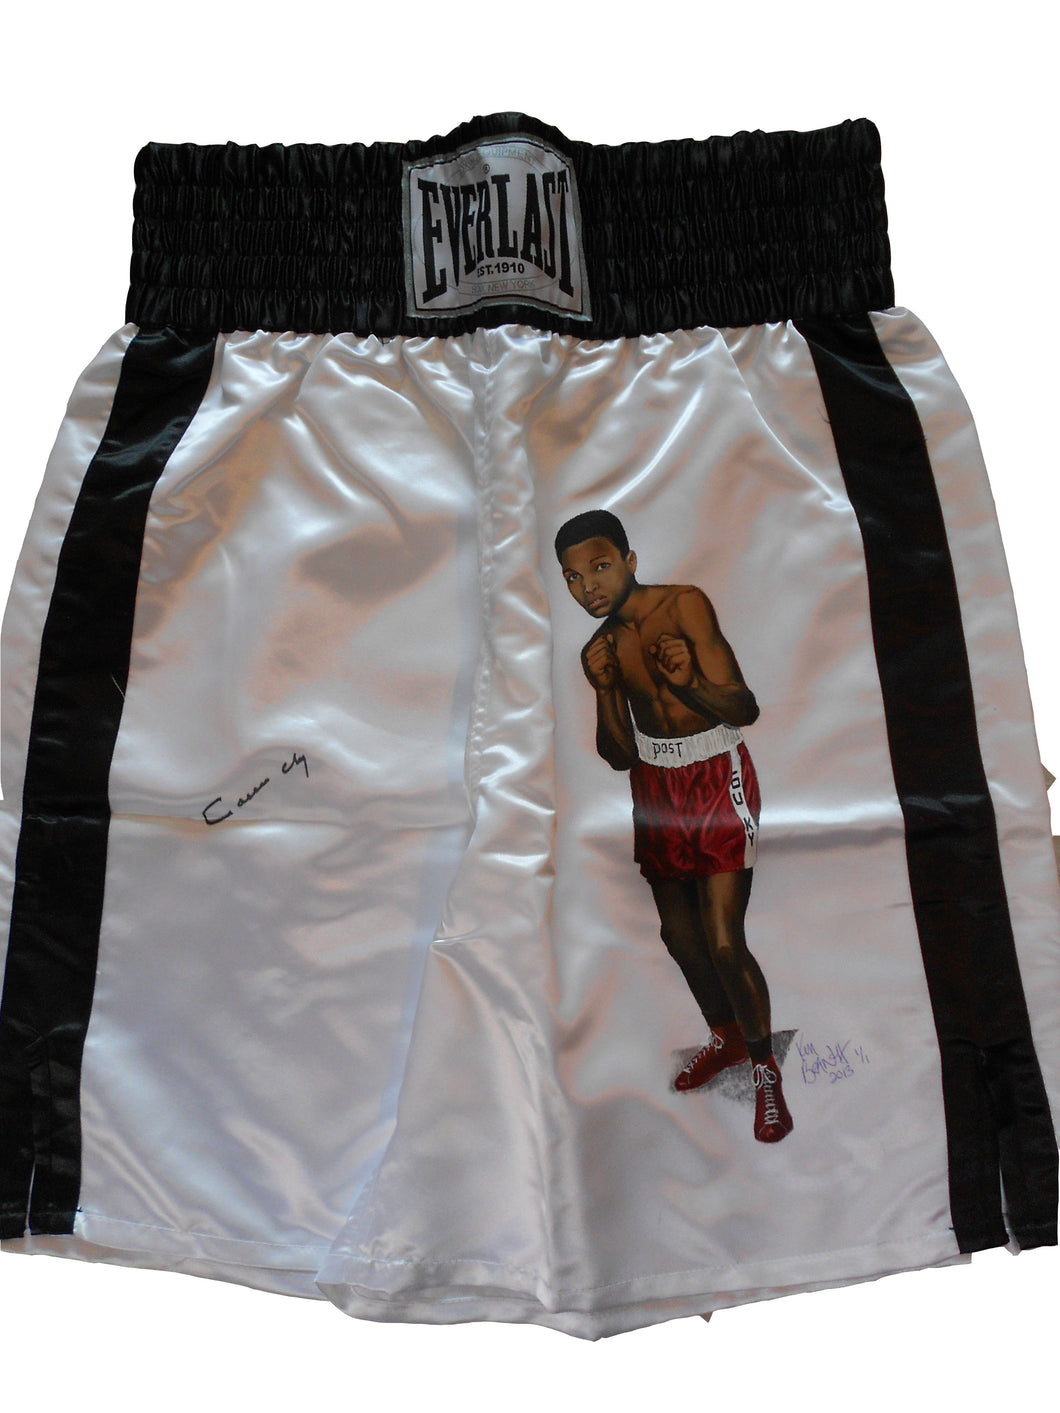 Cassius Clay Autographed and a young Muhammad Ali Painted on these Everlast Boxing Trunks